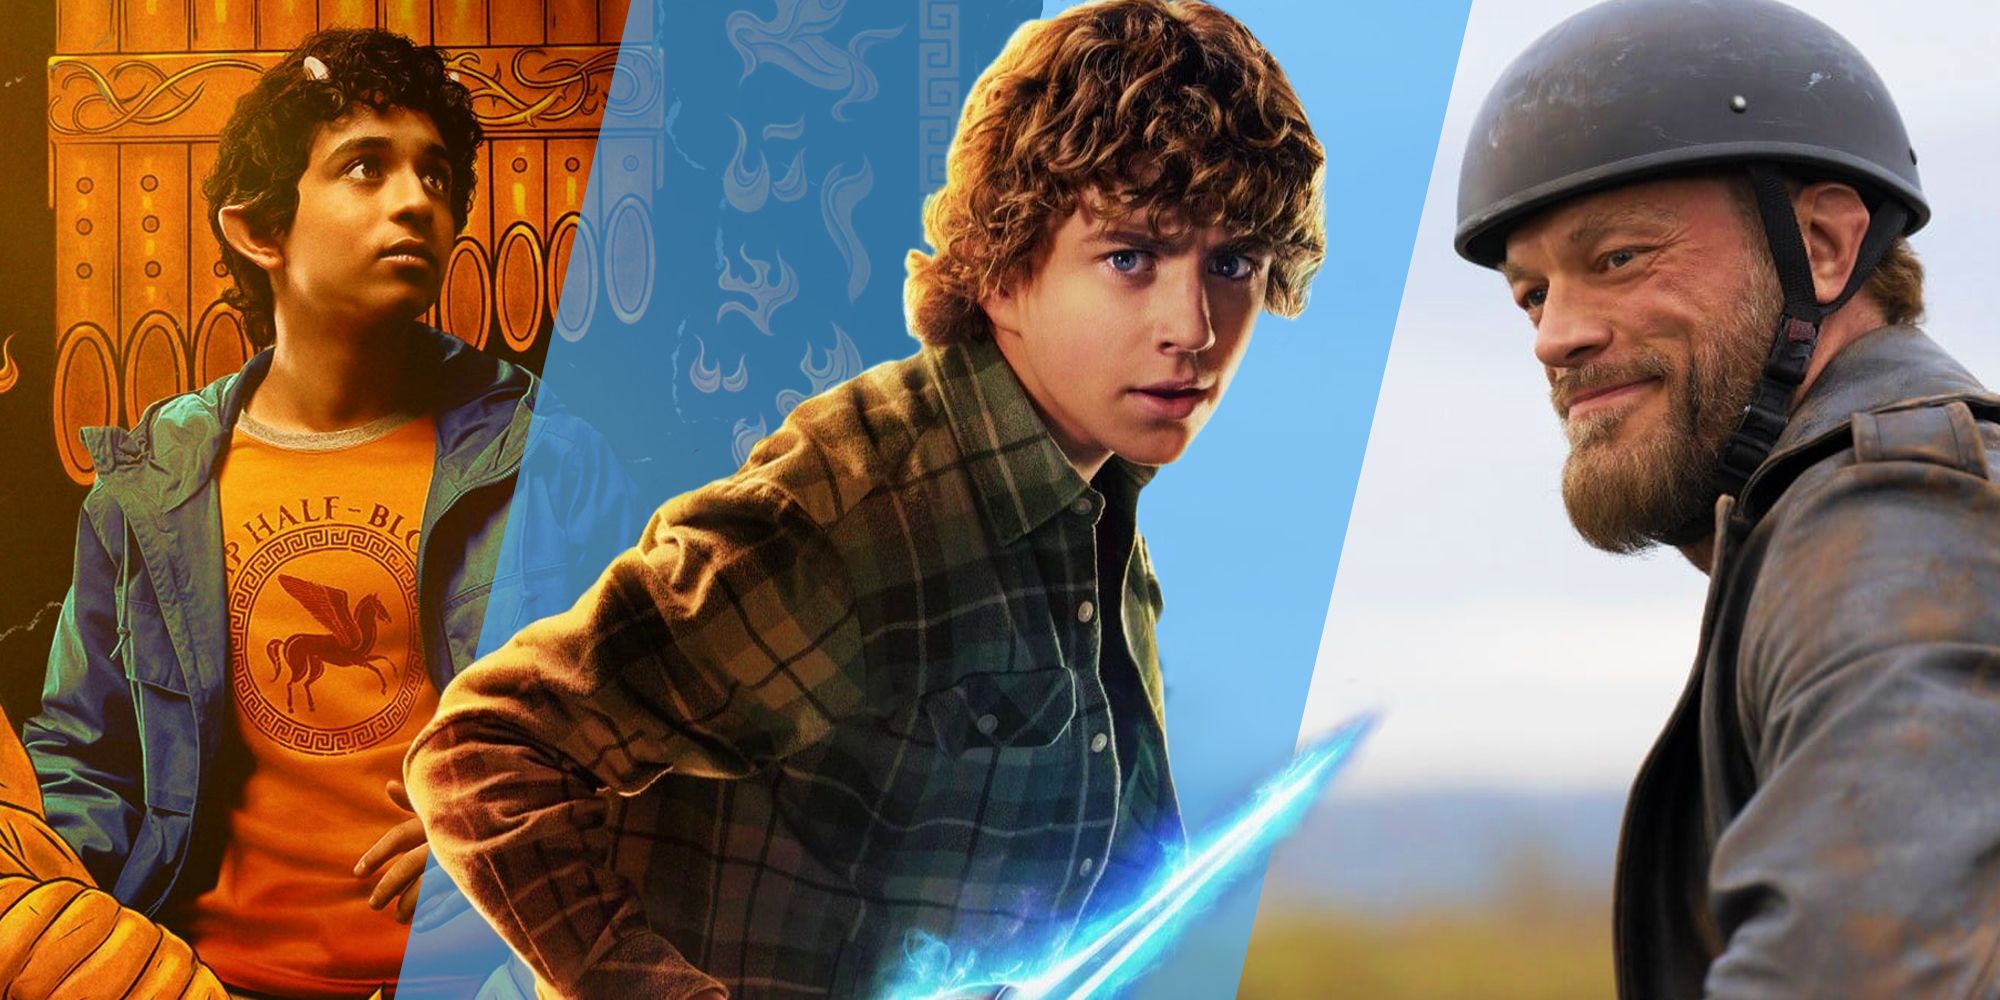 Percy in the poster for Percy Jackson between Grover's character poster and Adam Copeland as Ares atop his motorbike